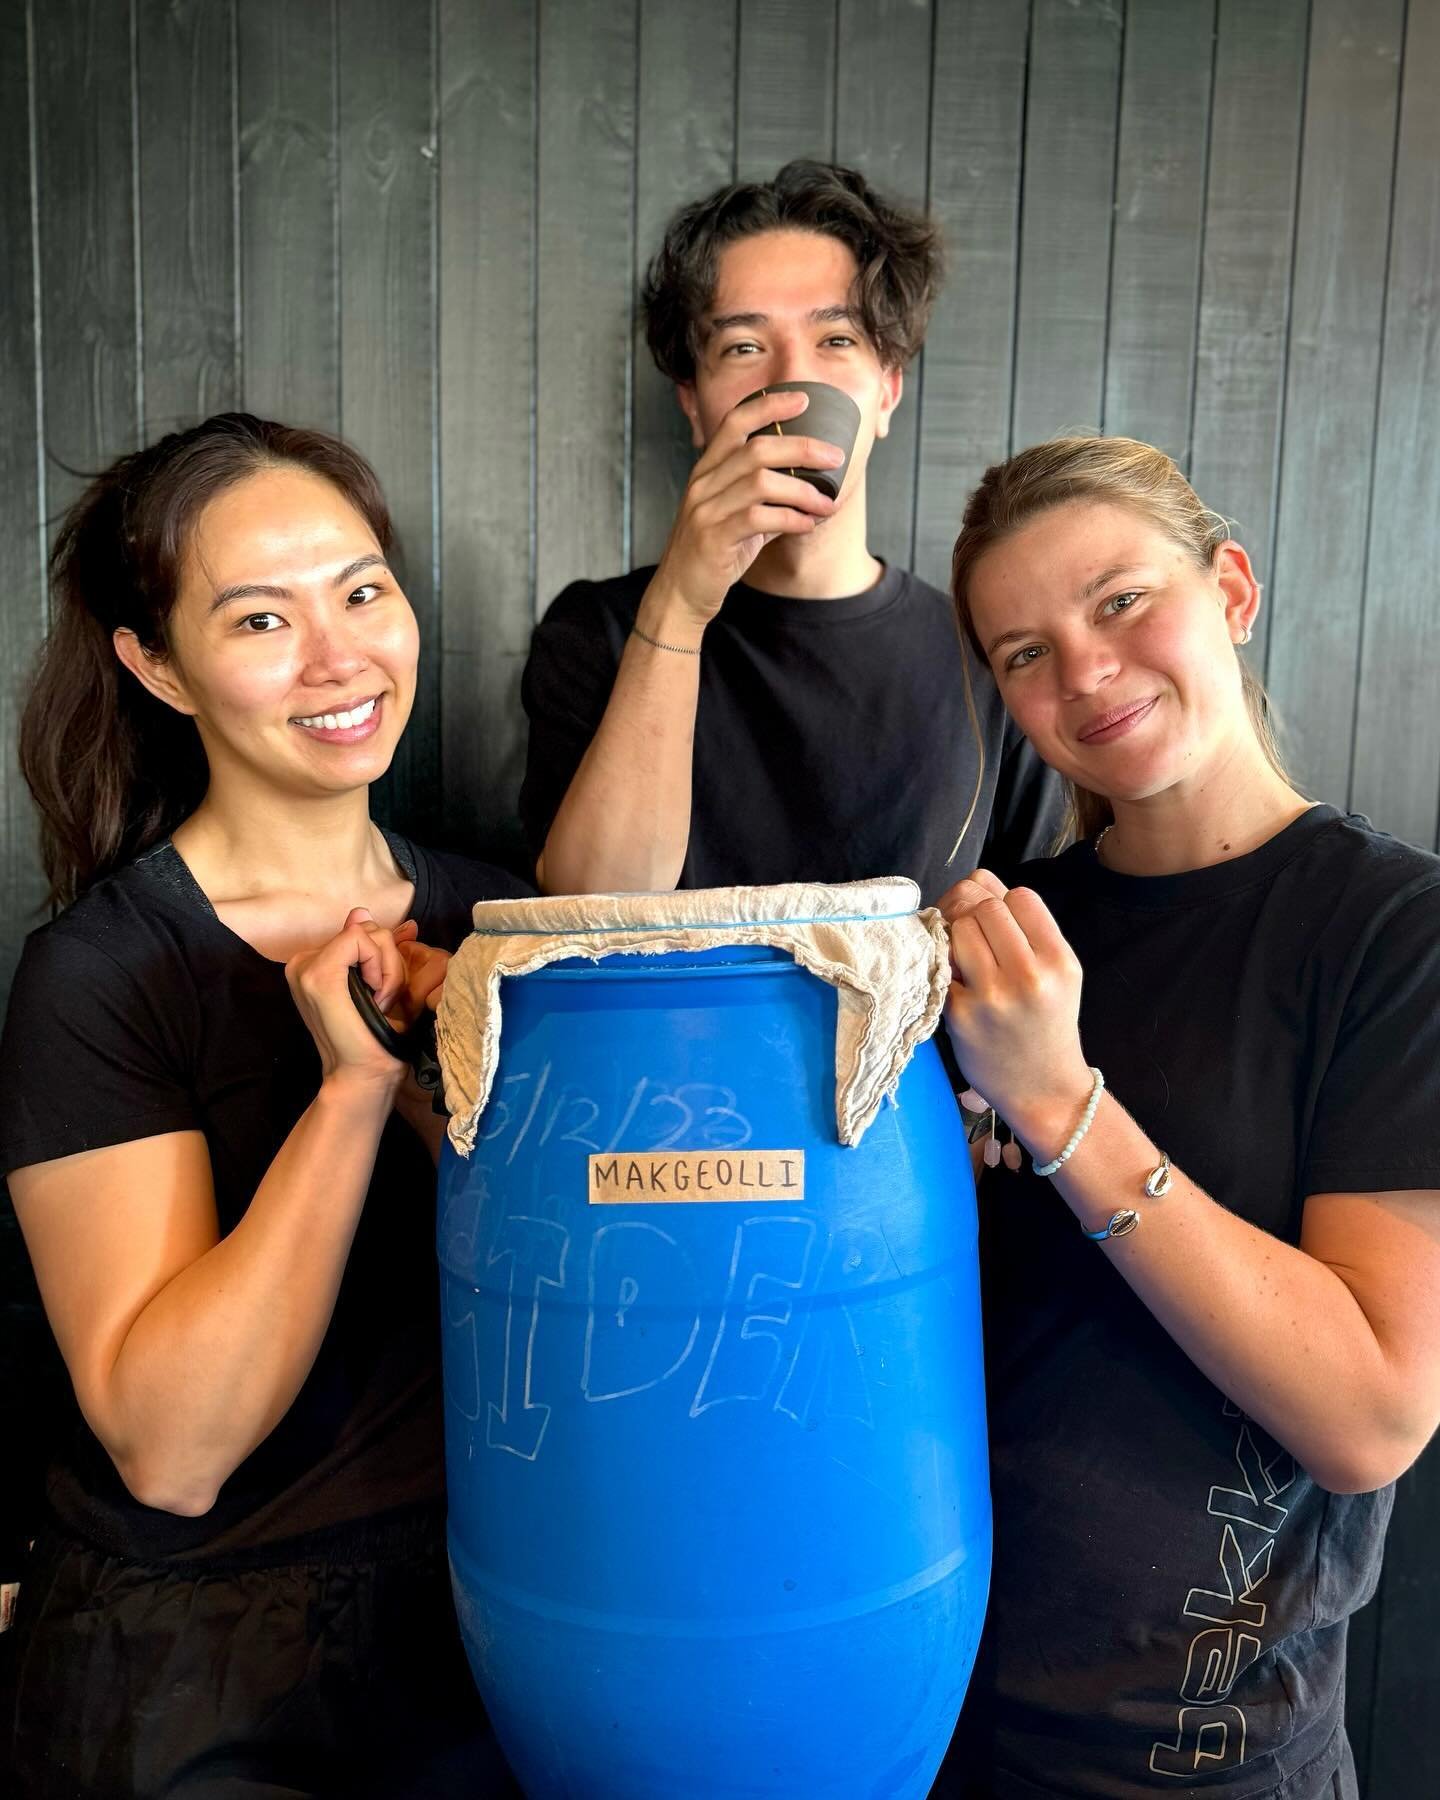 WHAT IS MAKGEOLLI?

Makgeolli (sometimes spelled makkoli) is a traditional Korean beverage, a milky, sparkling rice wine.

We&rsquo;re making our own version with a mix of Nuruk*, our home grown Koji, elderflower and Pirate Rice (emission free rice c